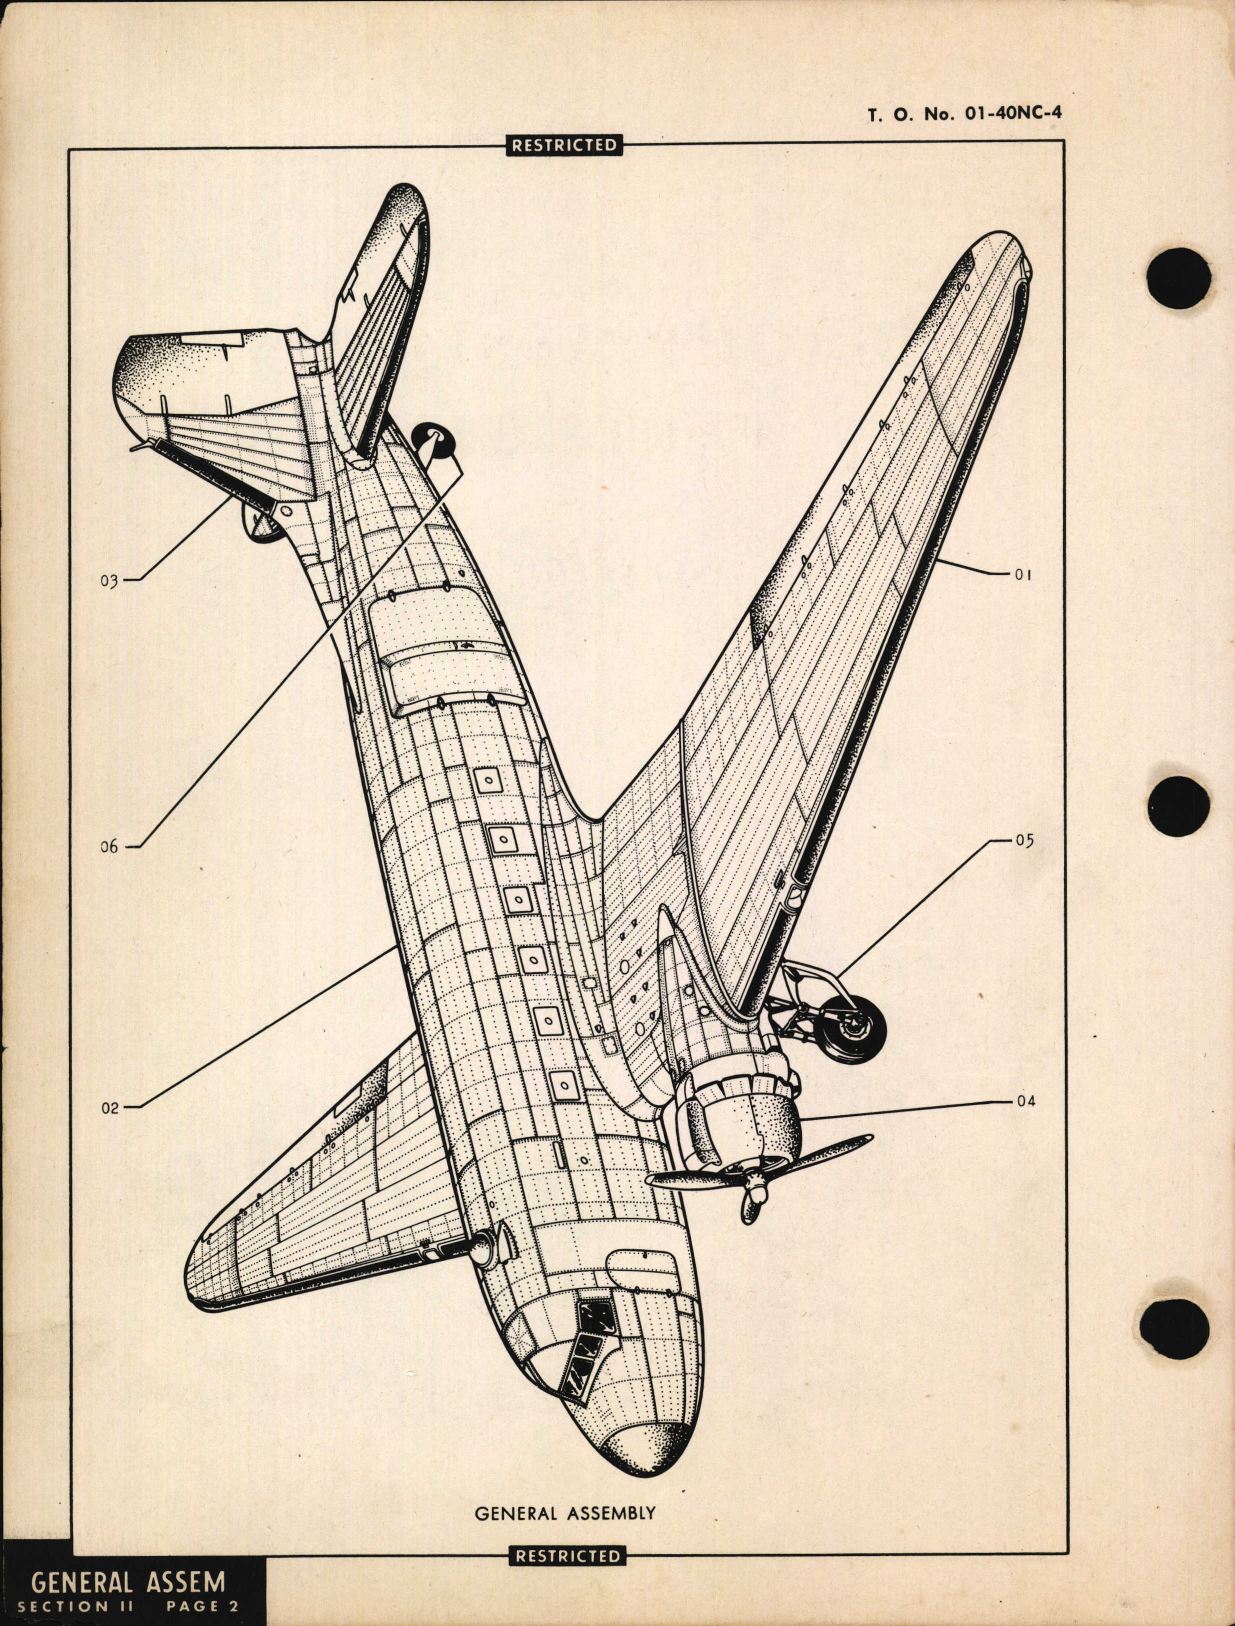 Sample page 6 from AirCorps Library document: Parts Catalog for C-47, R4D-1, and Dakota I